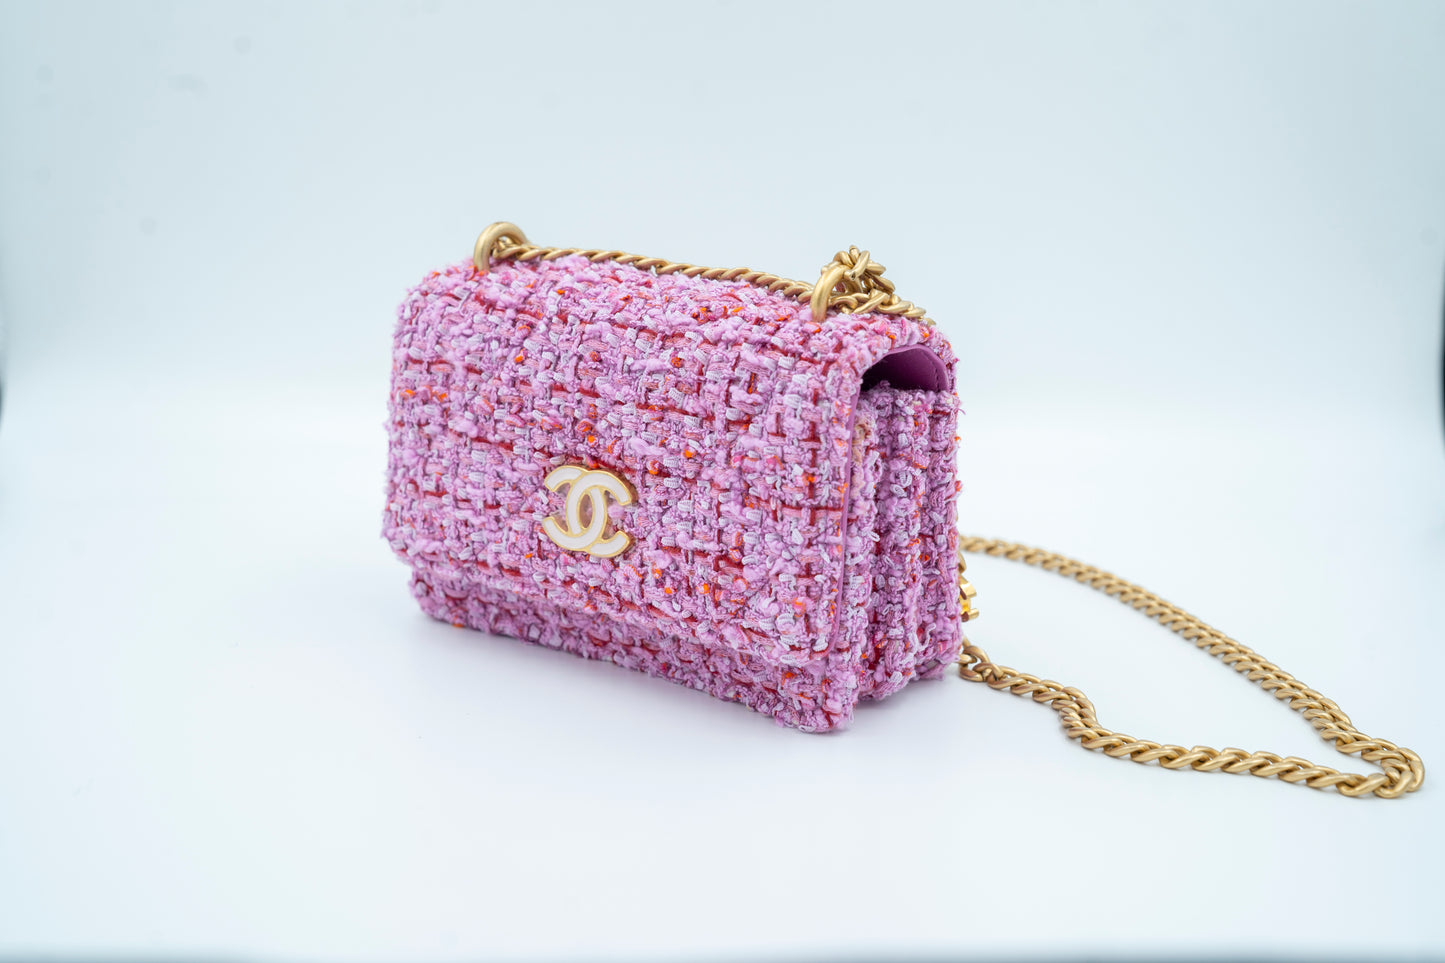 CHANEL 22P SQUARE FLAP BAG TWEED PINK WITH PINK HARDWARE